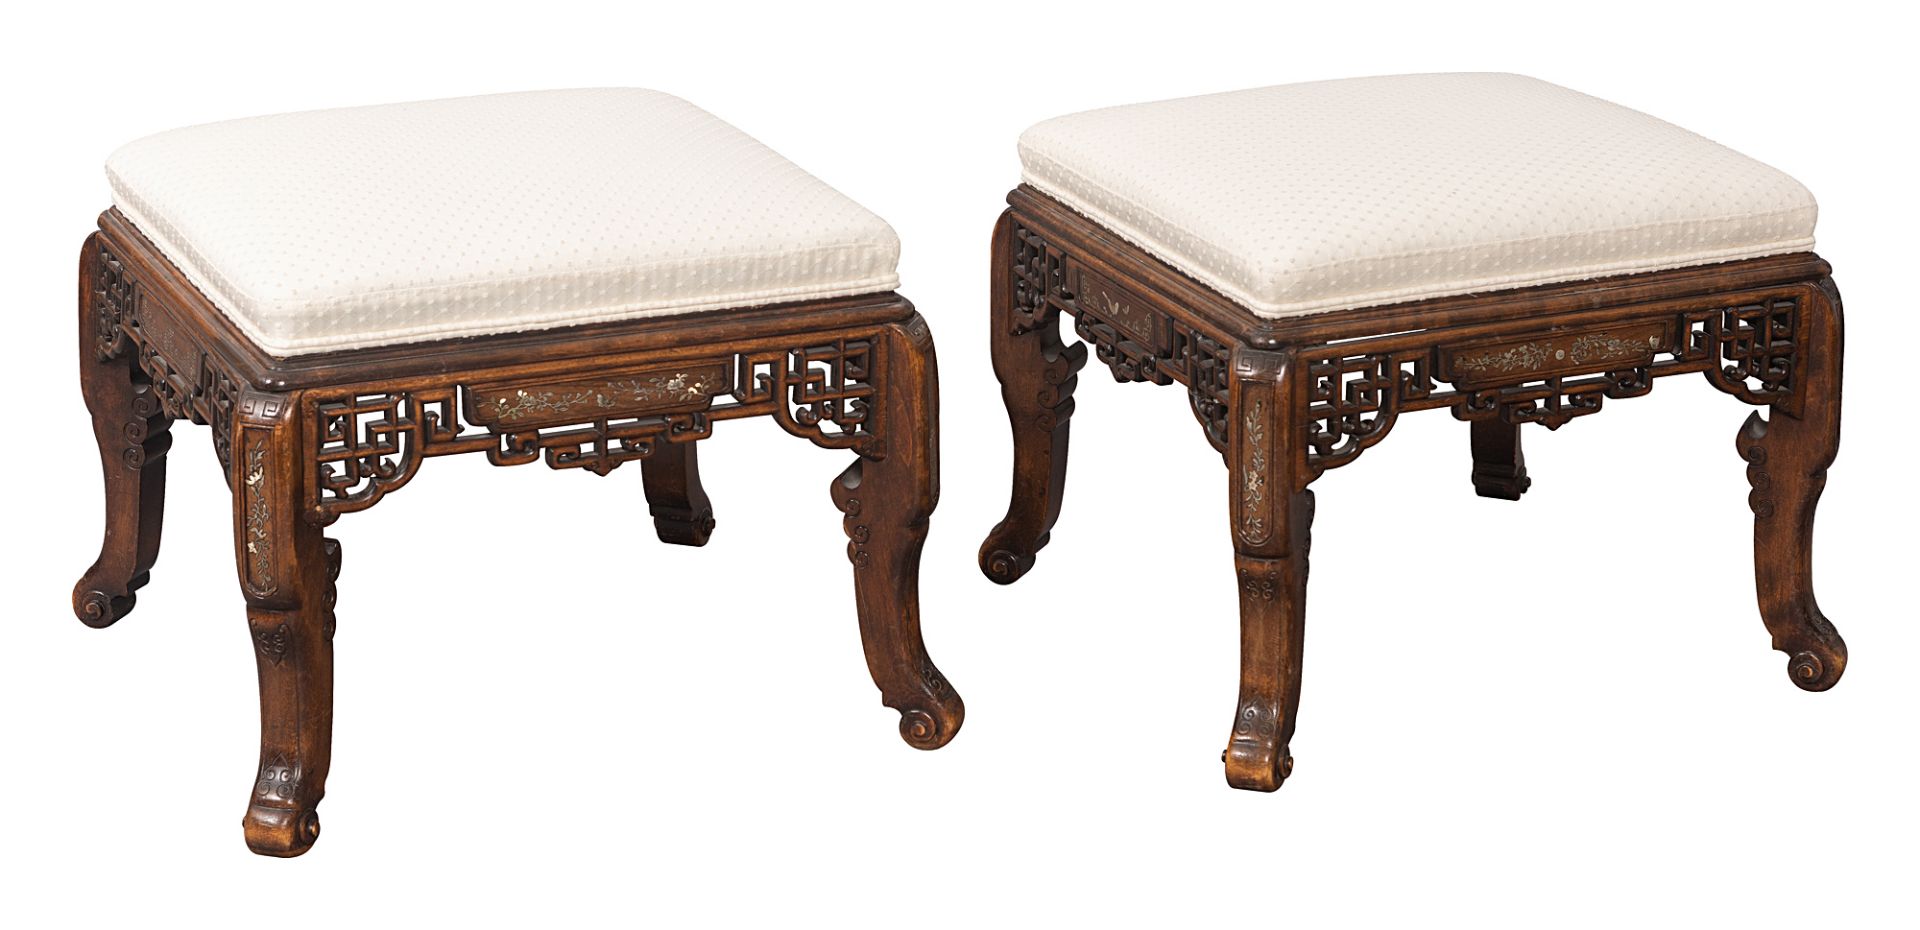 Pair of stools with mother-of-pearl intarsia